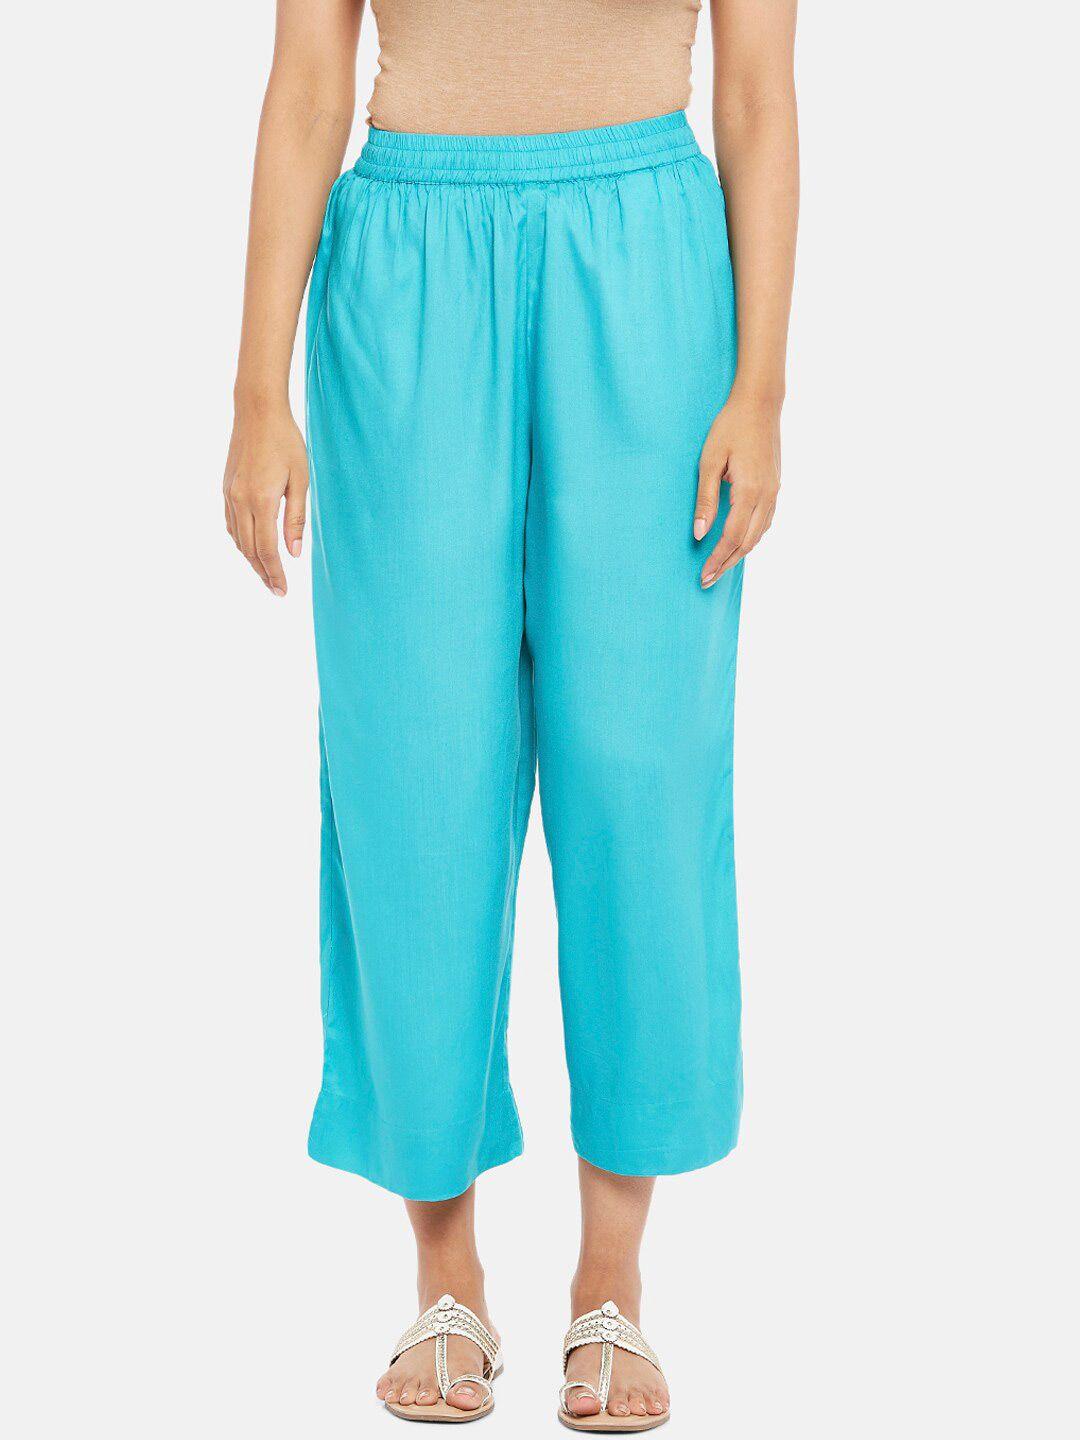 RANGMANCH BY PANTALOONS Women Turquoise Blue Solid